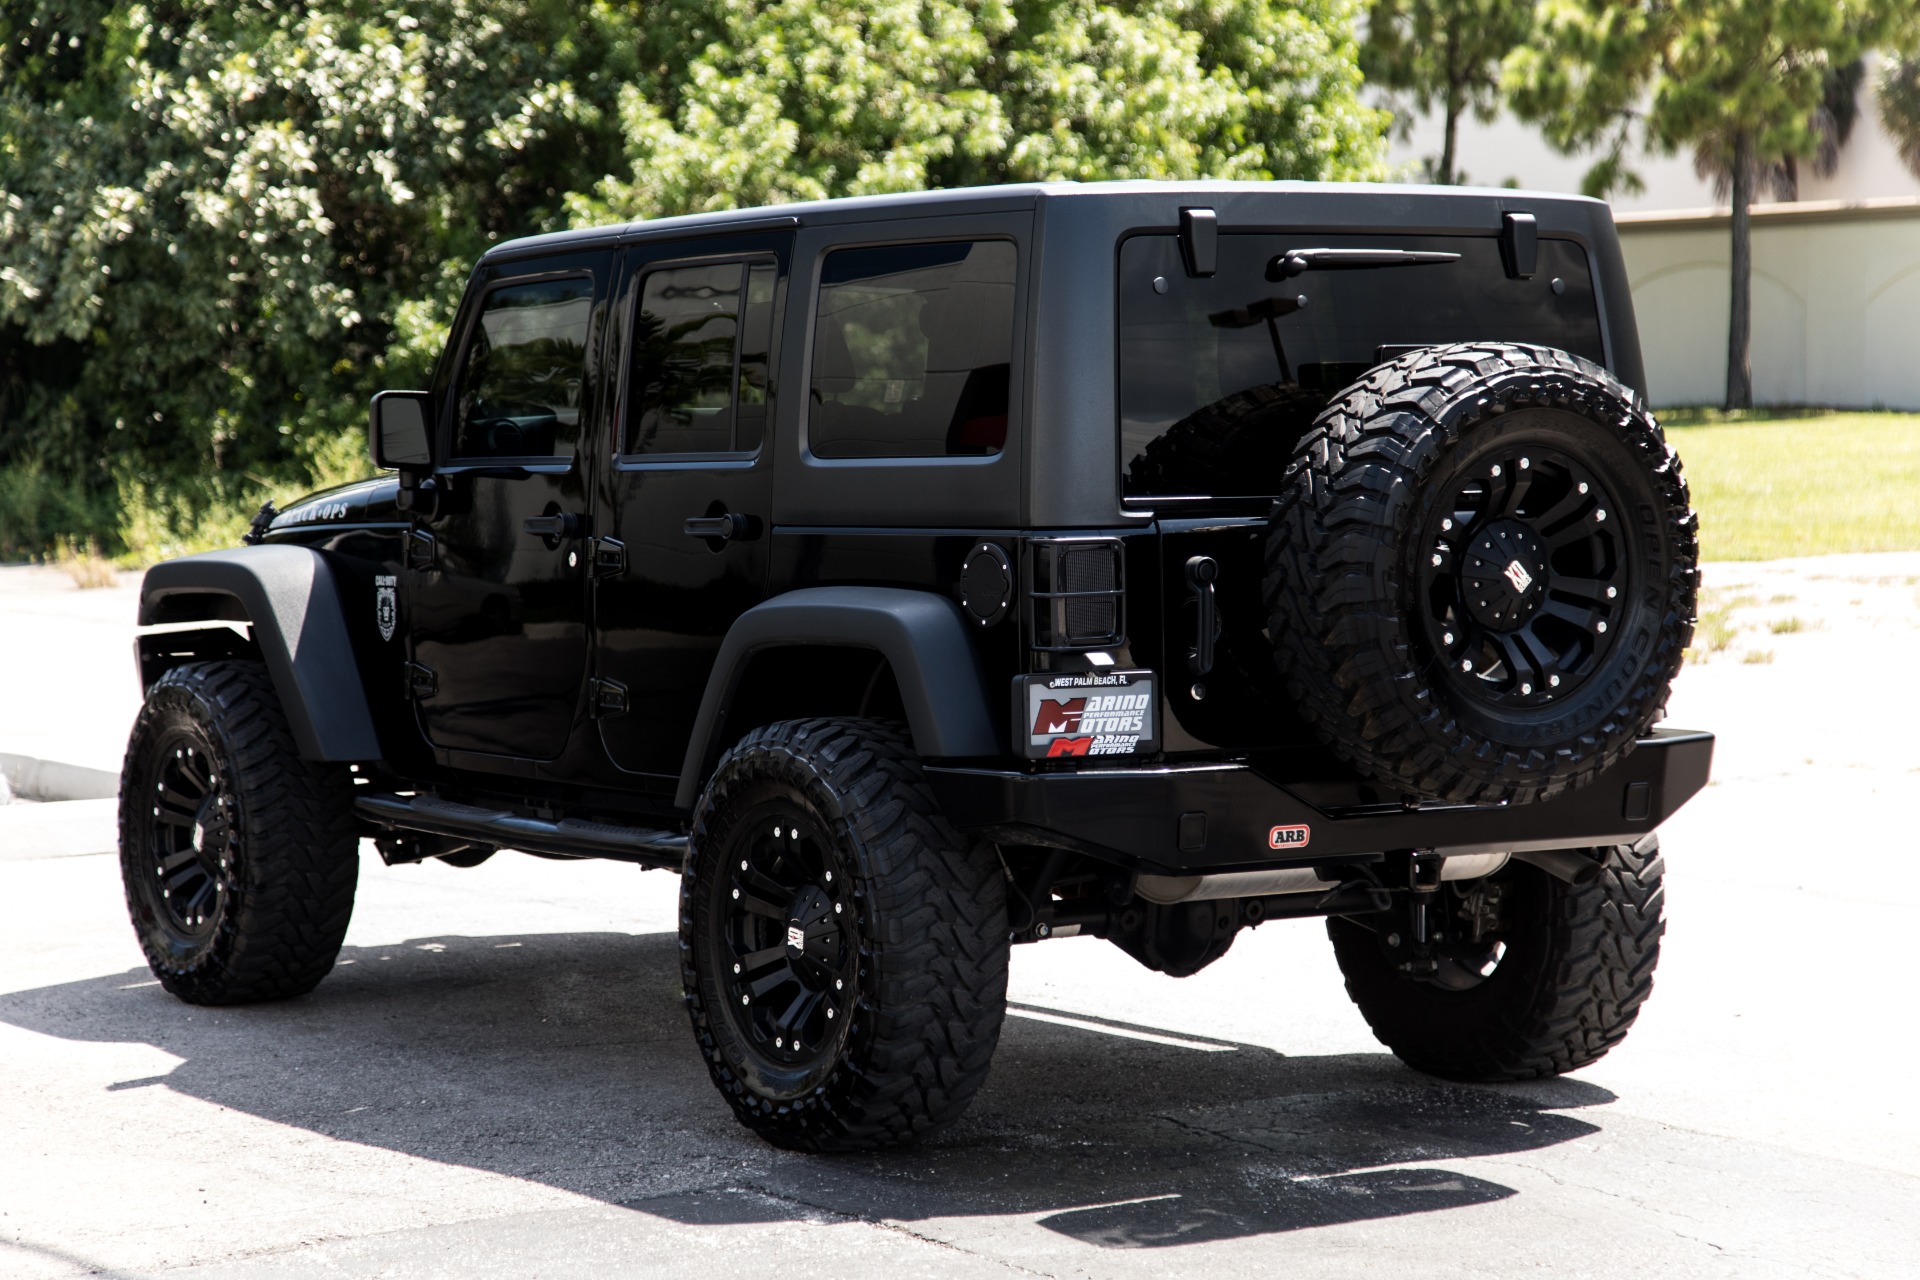 Used 2011 Jeep Wrangler Unlimited Rubicon Black Ops